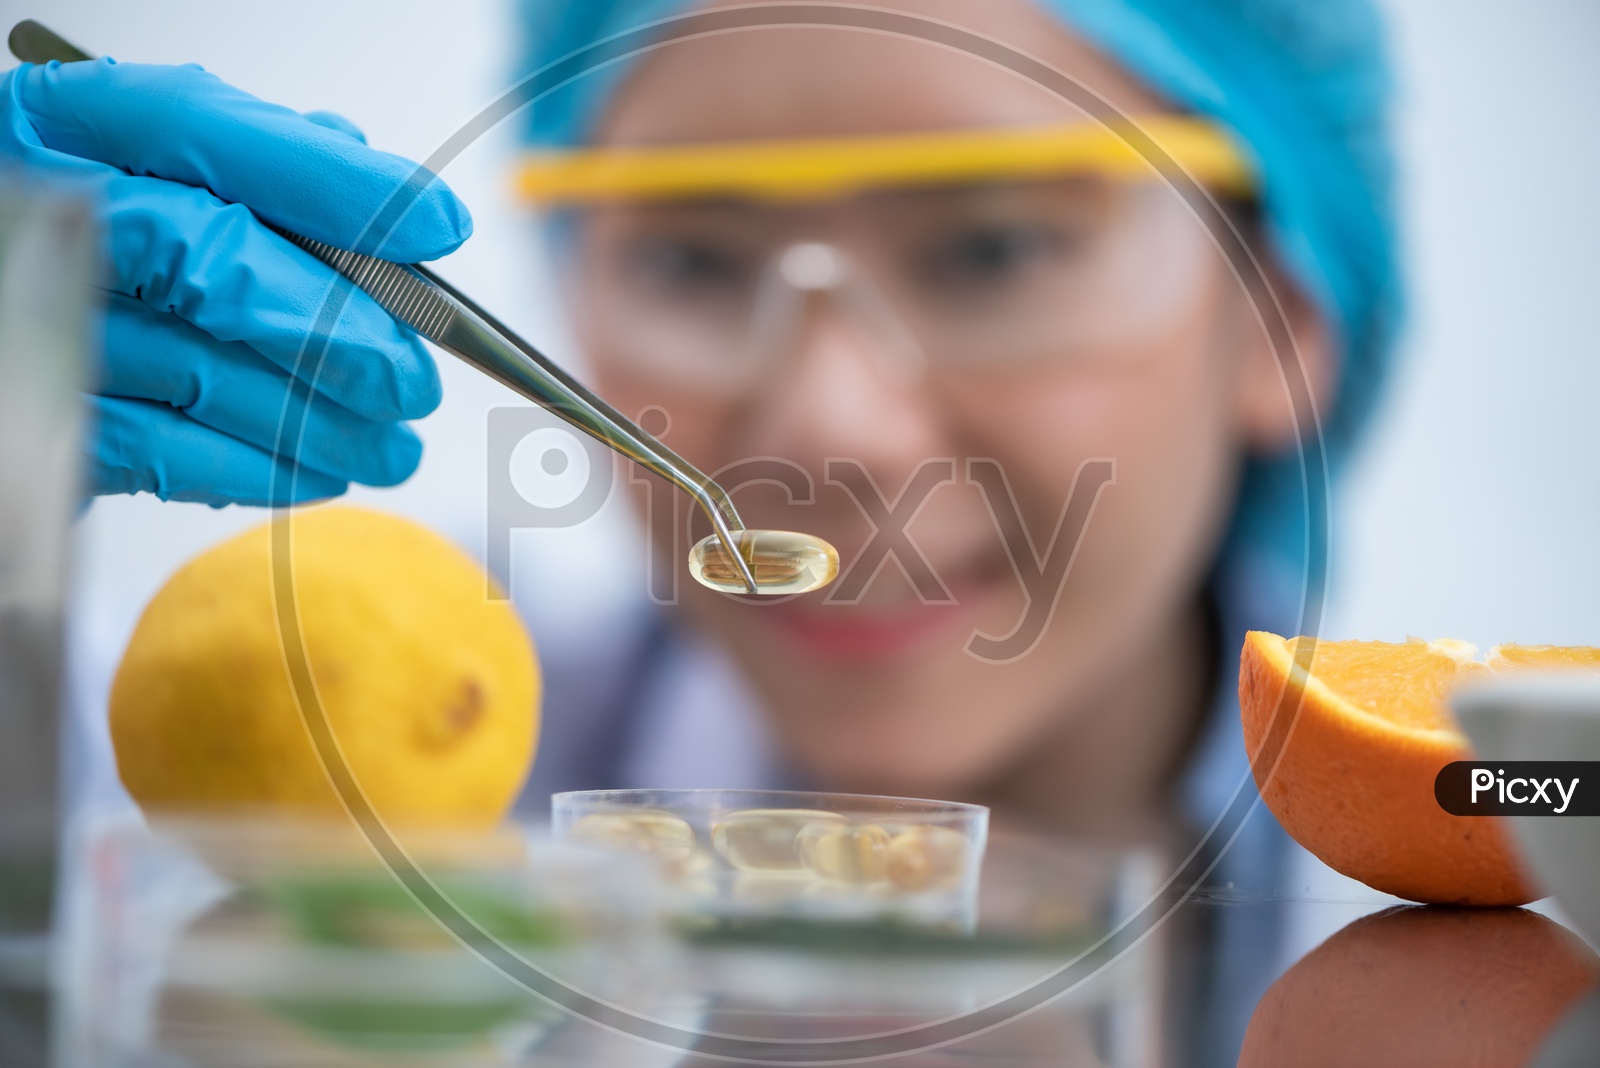 Young Asian Woman Scientist Holding Fish Oil Pill Or Capsule with Oranges in Foreground